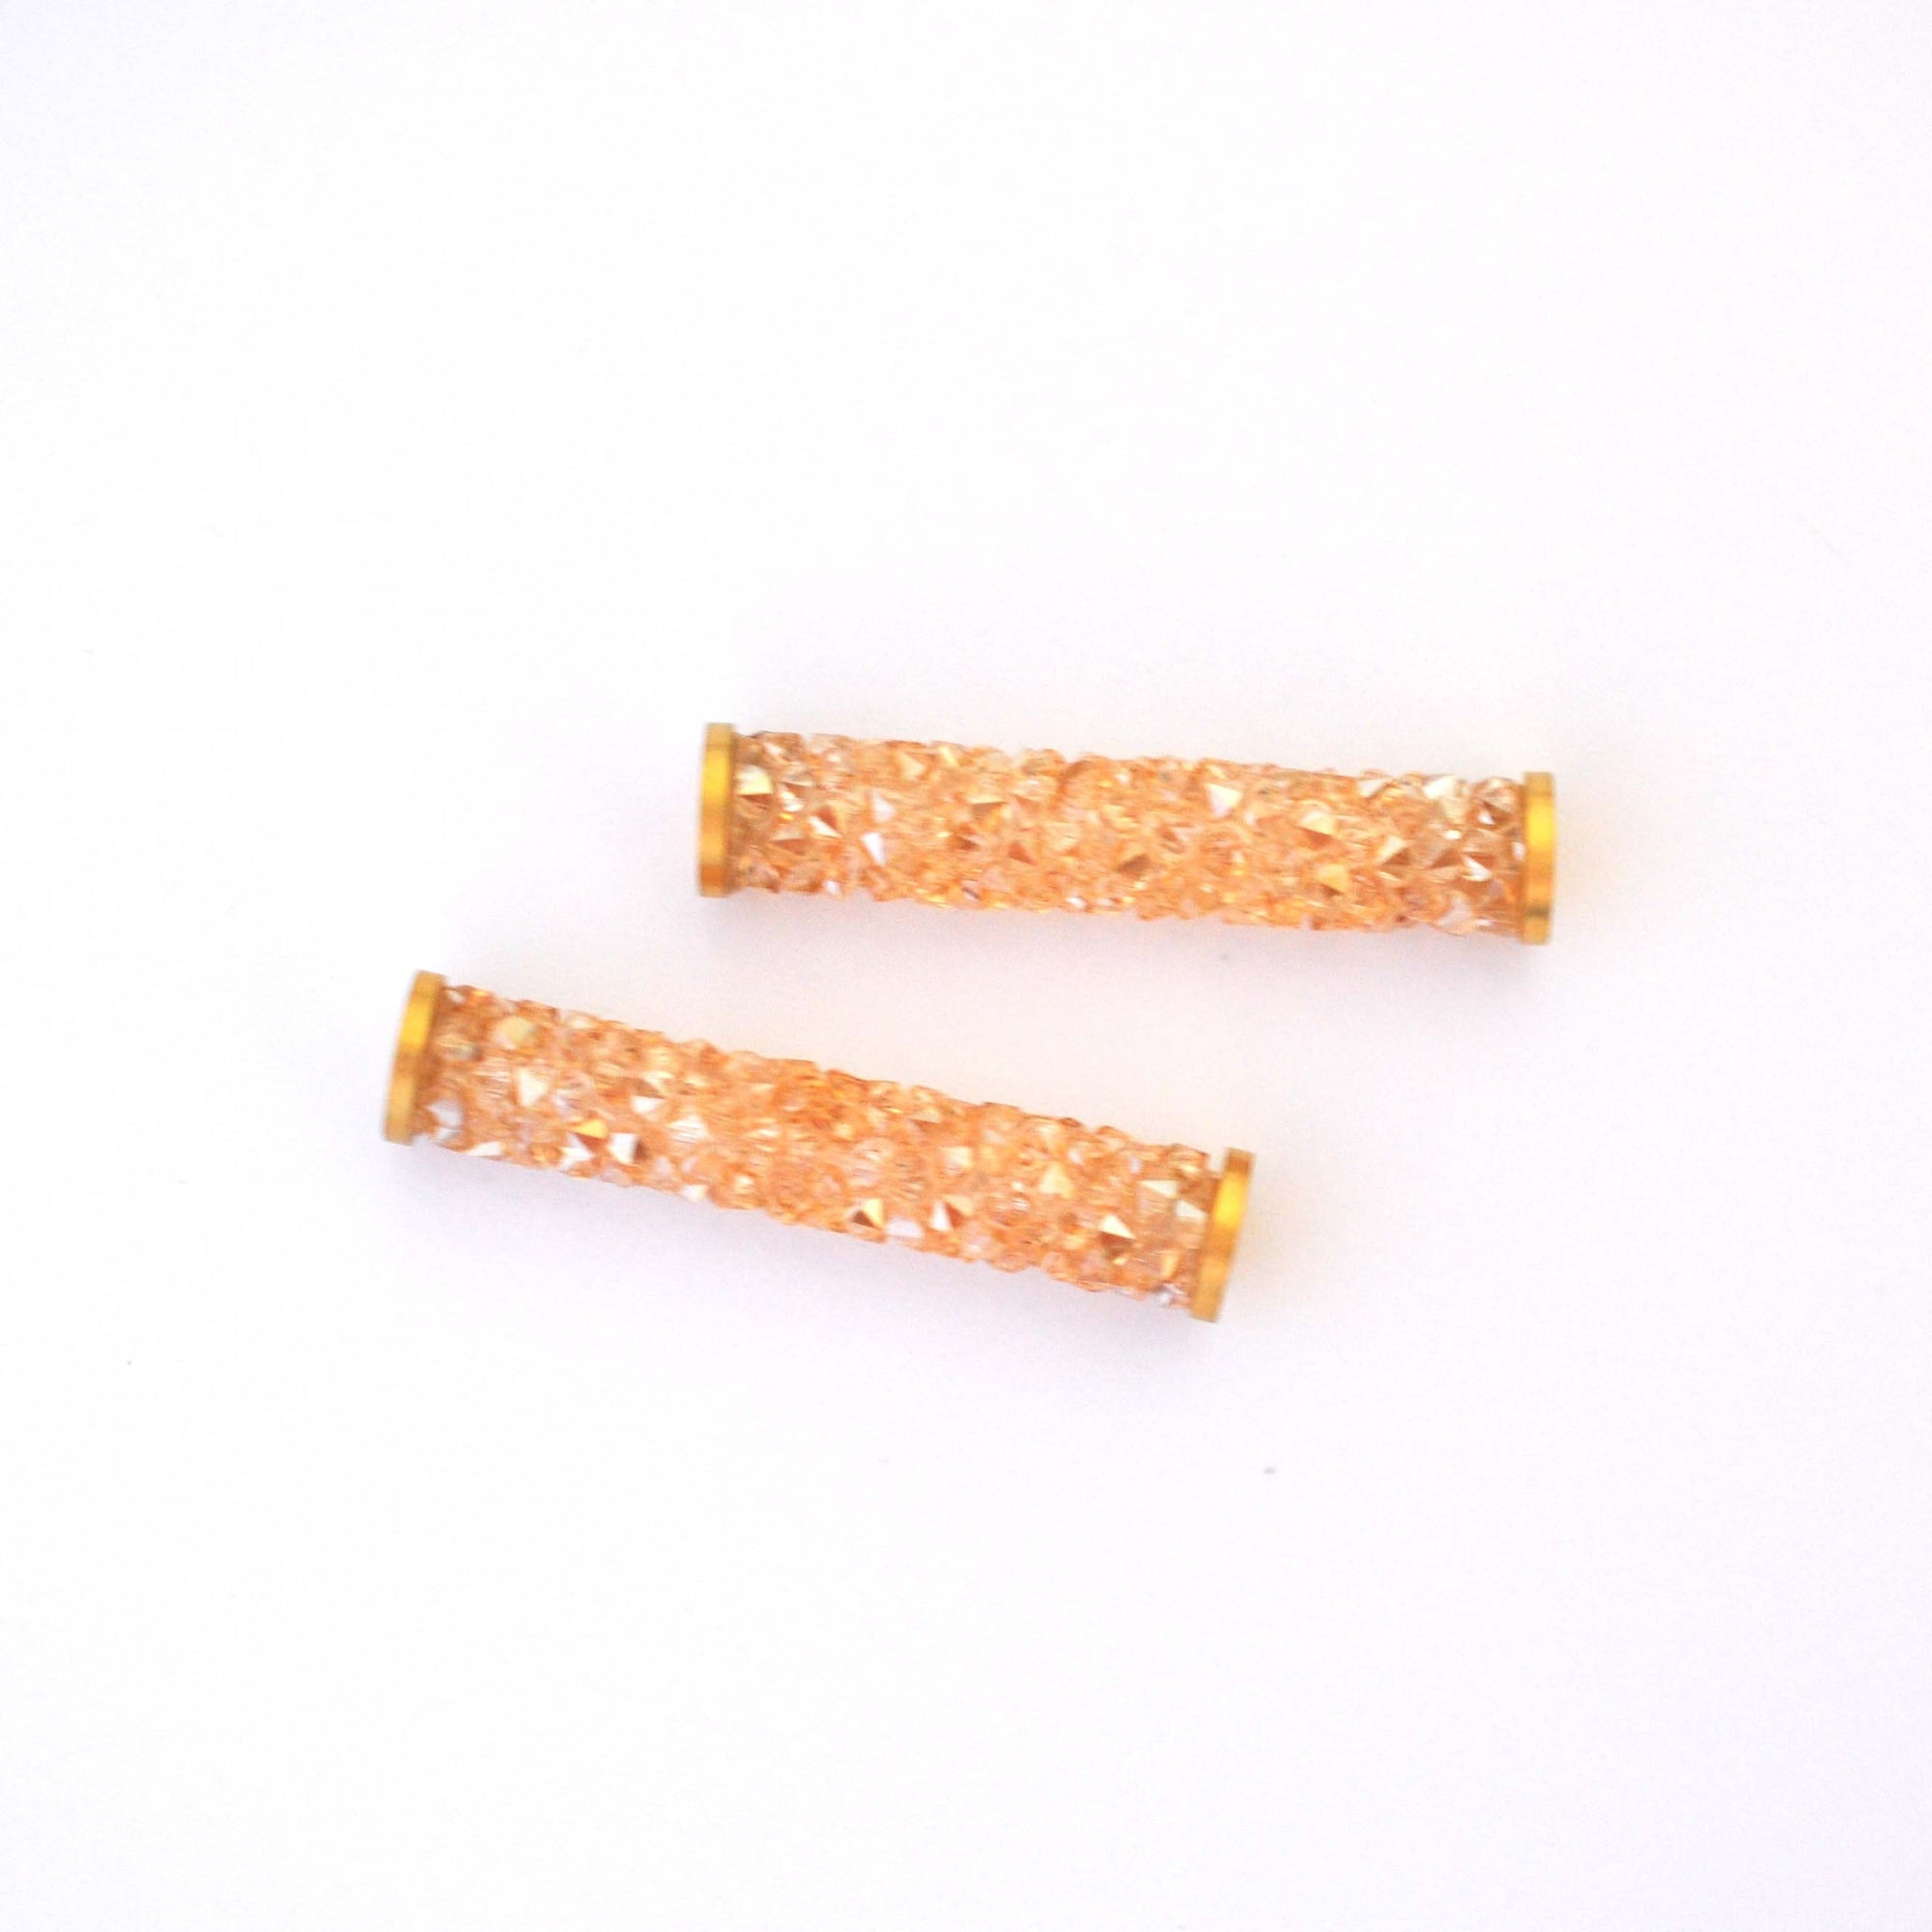 Golden Shadow W. Gold Plated Accents Fine Rocks Tube Beads Barton Crystal 30MM - 1 Bead